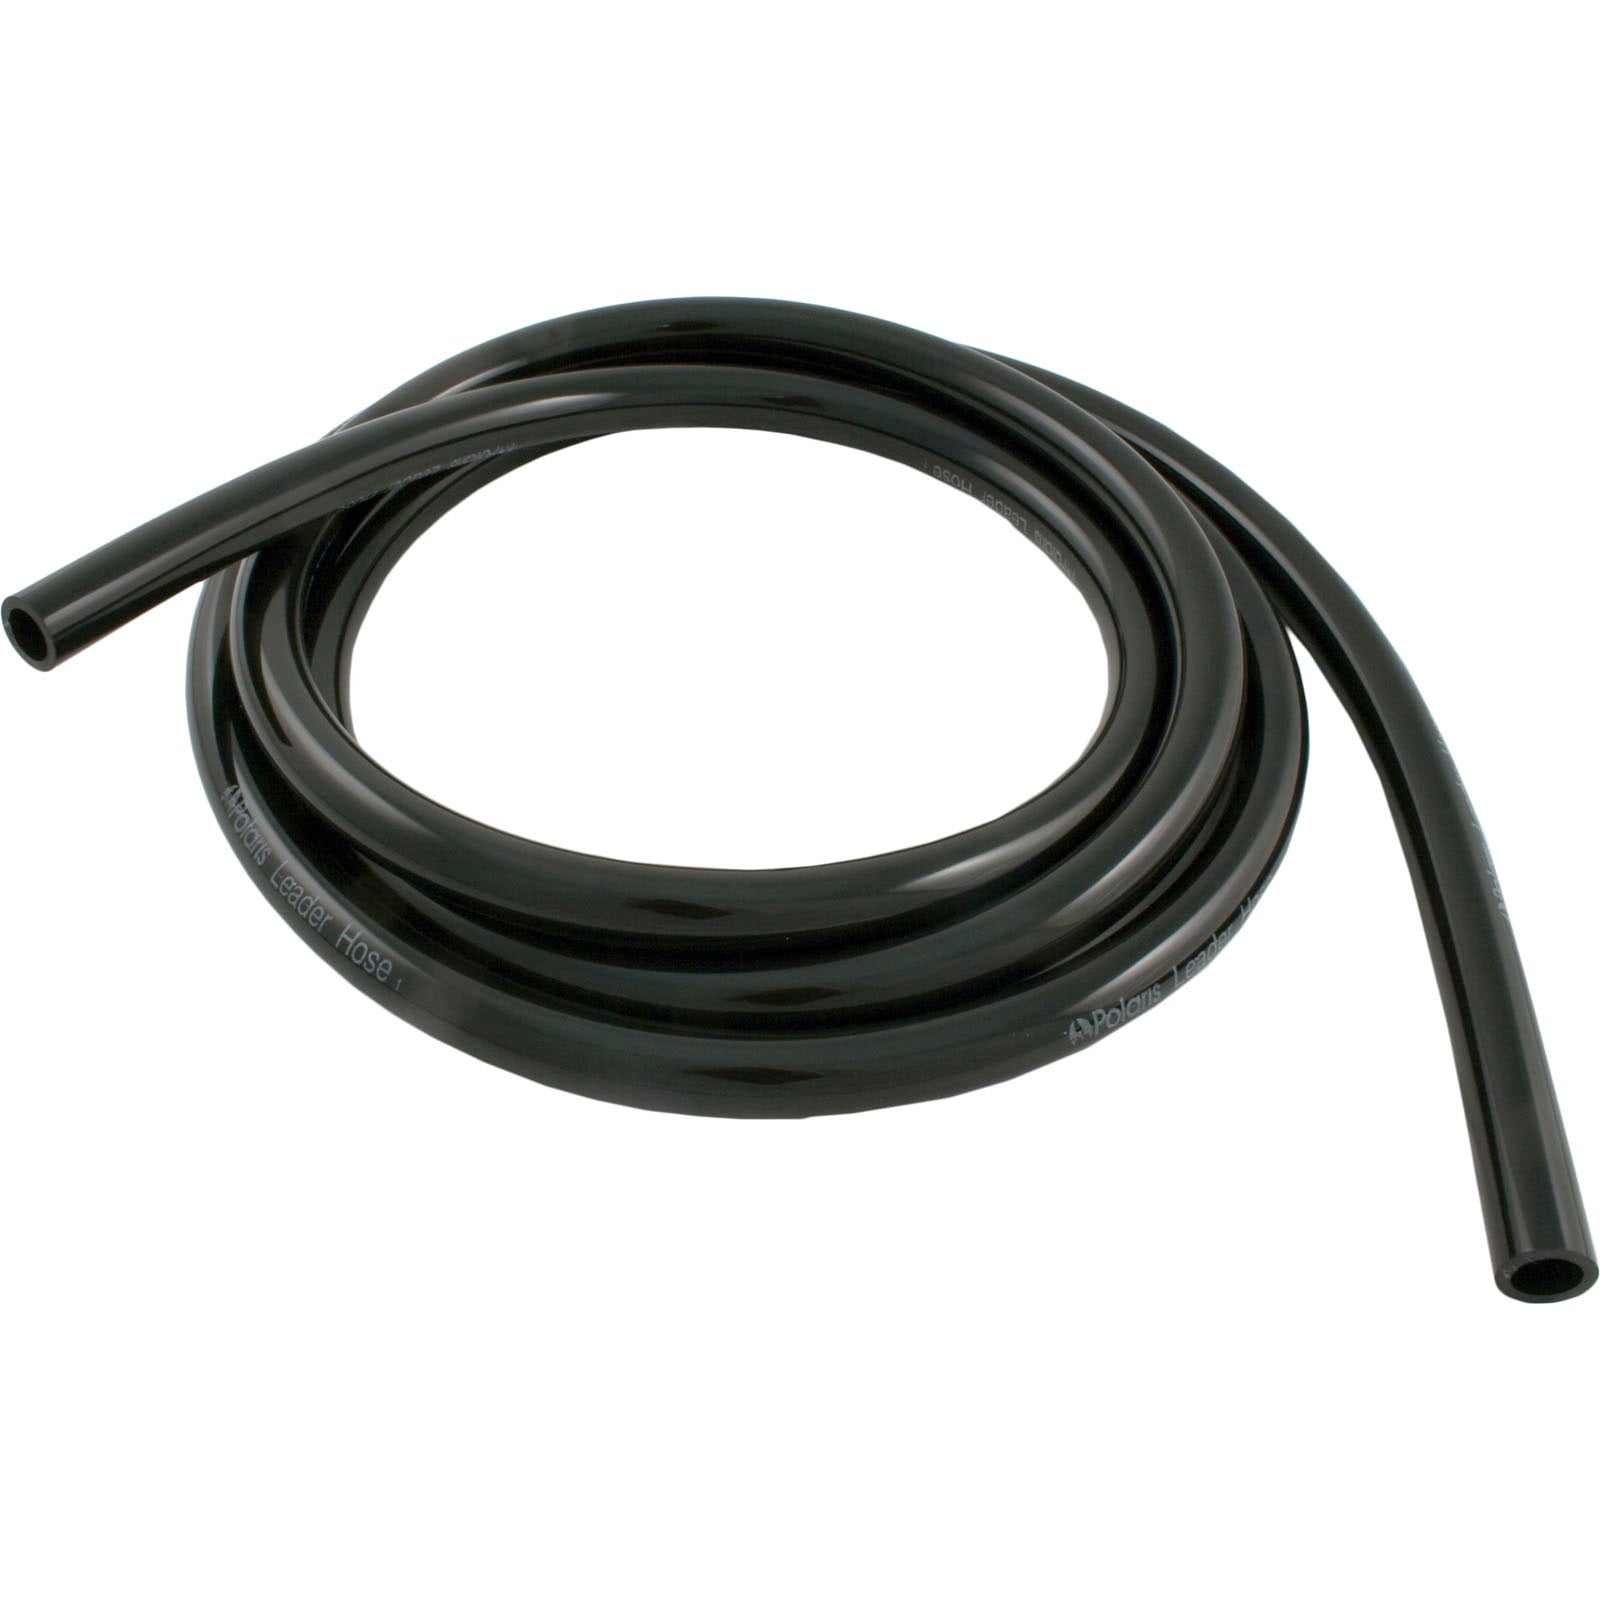 Polaris® D52 Leader 10' Black Leader Feed Hose for 280/380 and 480 PRO Pool Cleaners